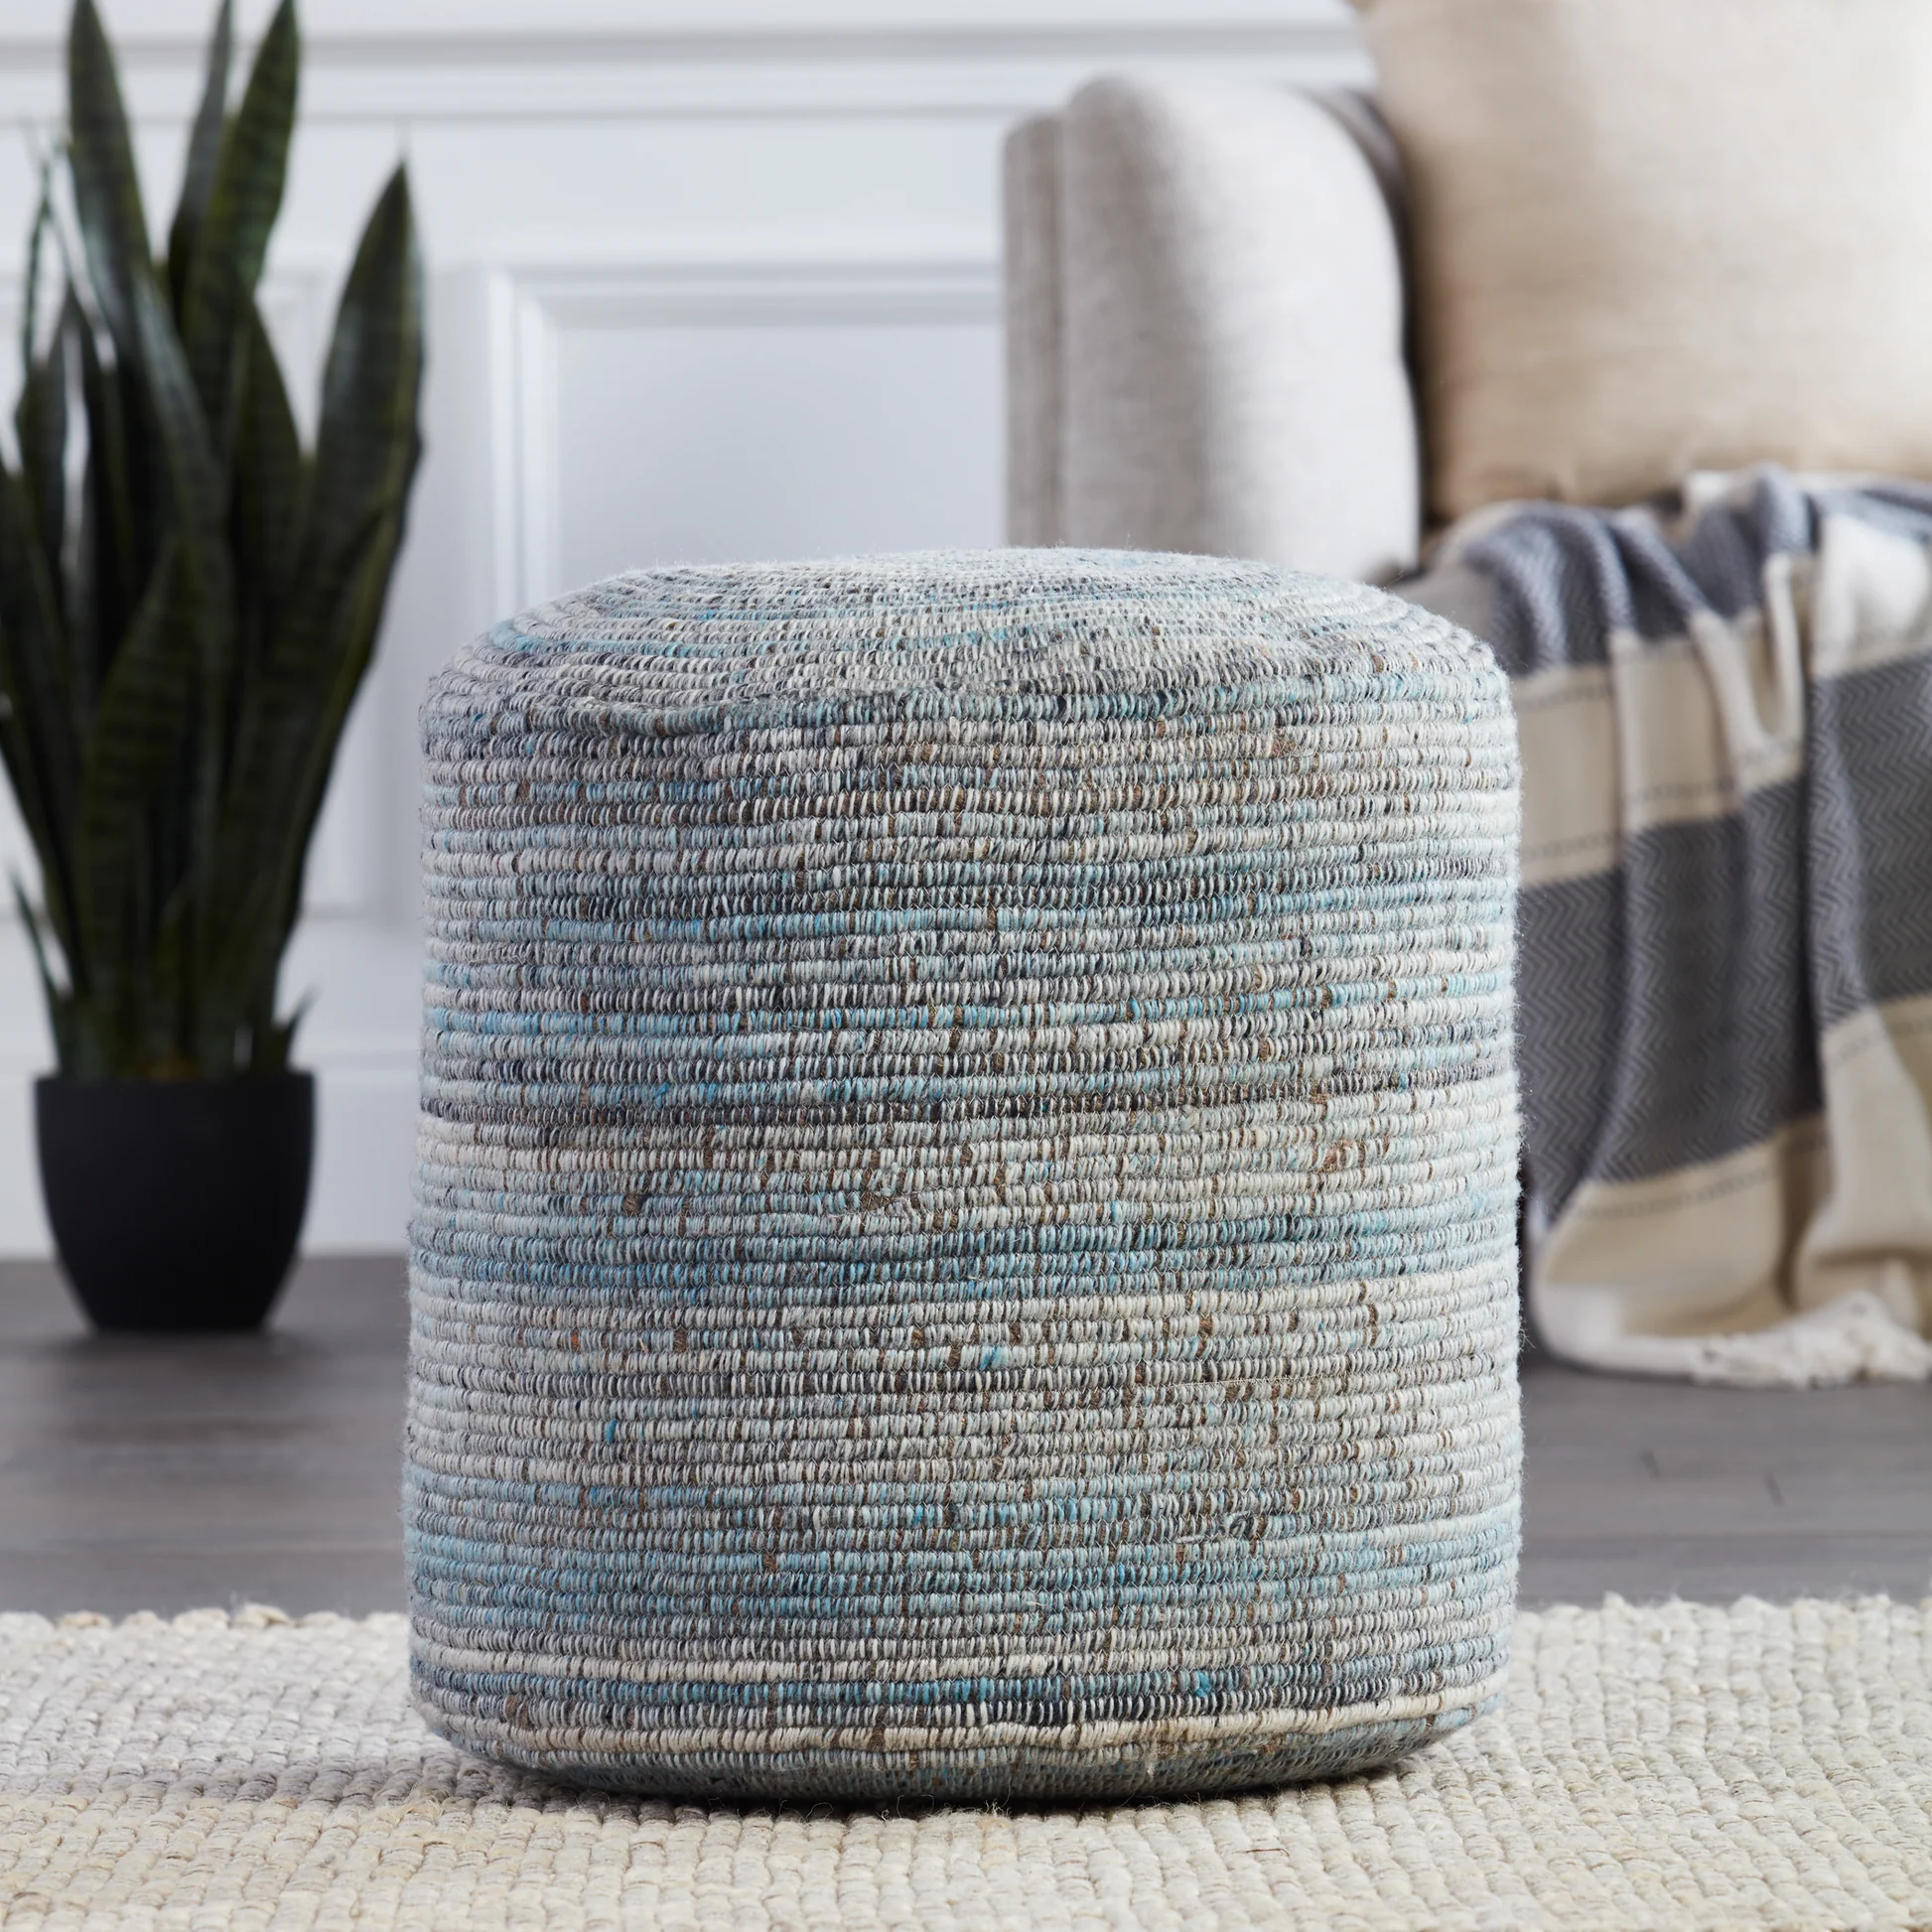 Pouf in the house is always comfortable for both guests and family